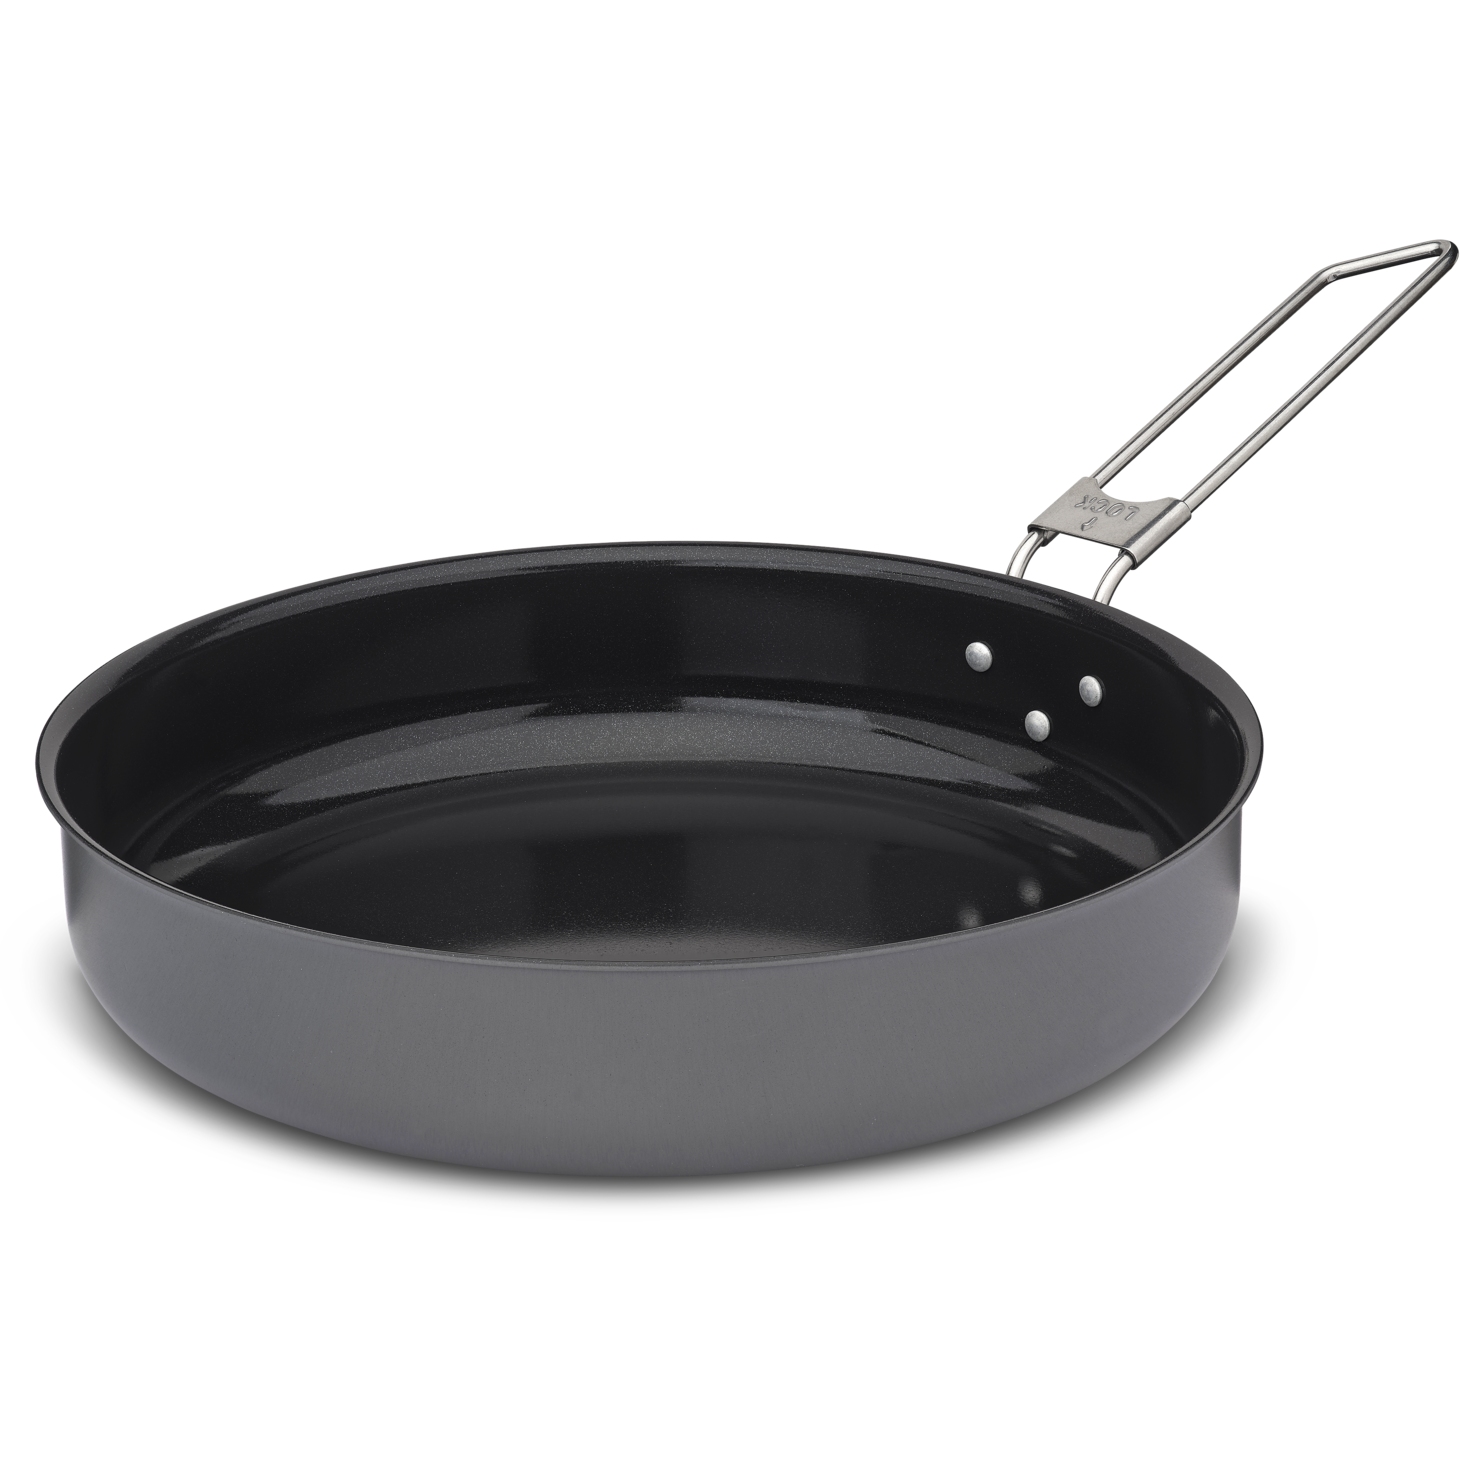 Picture of Primus LiTech Frying Pan - 25cm